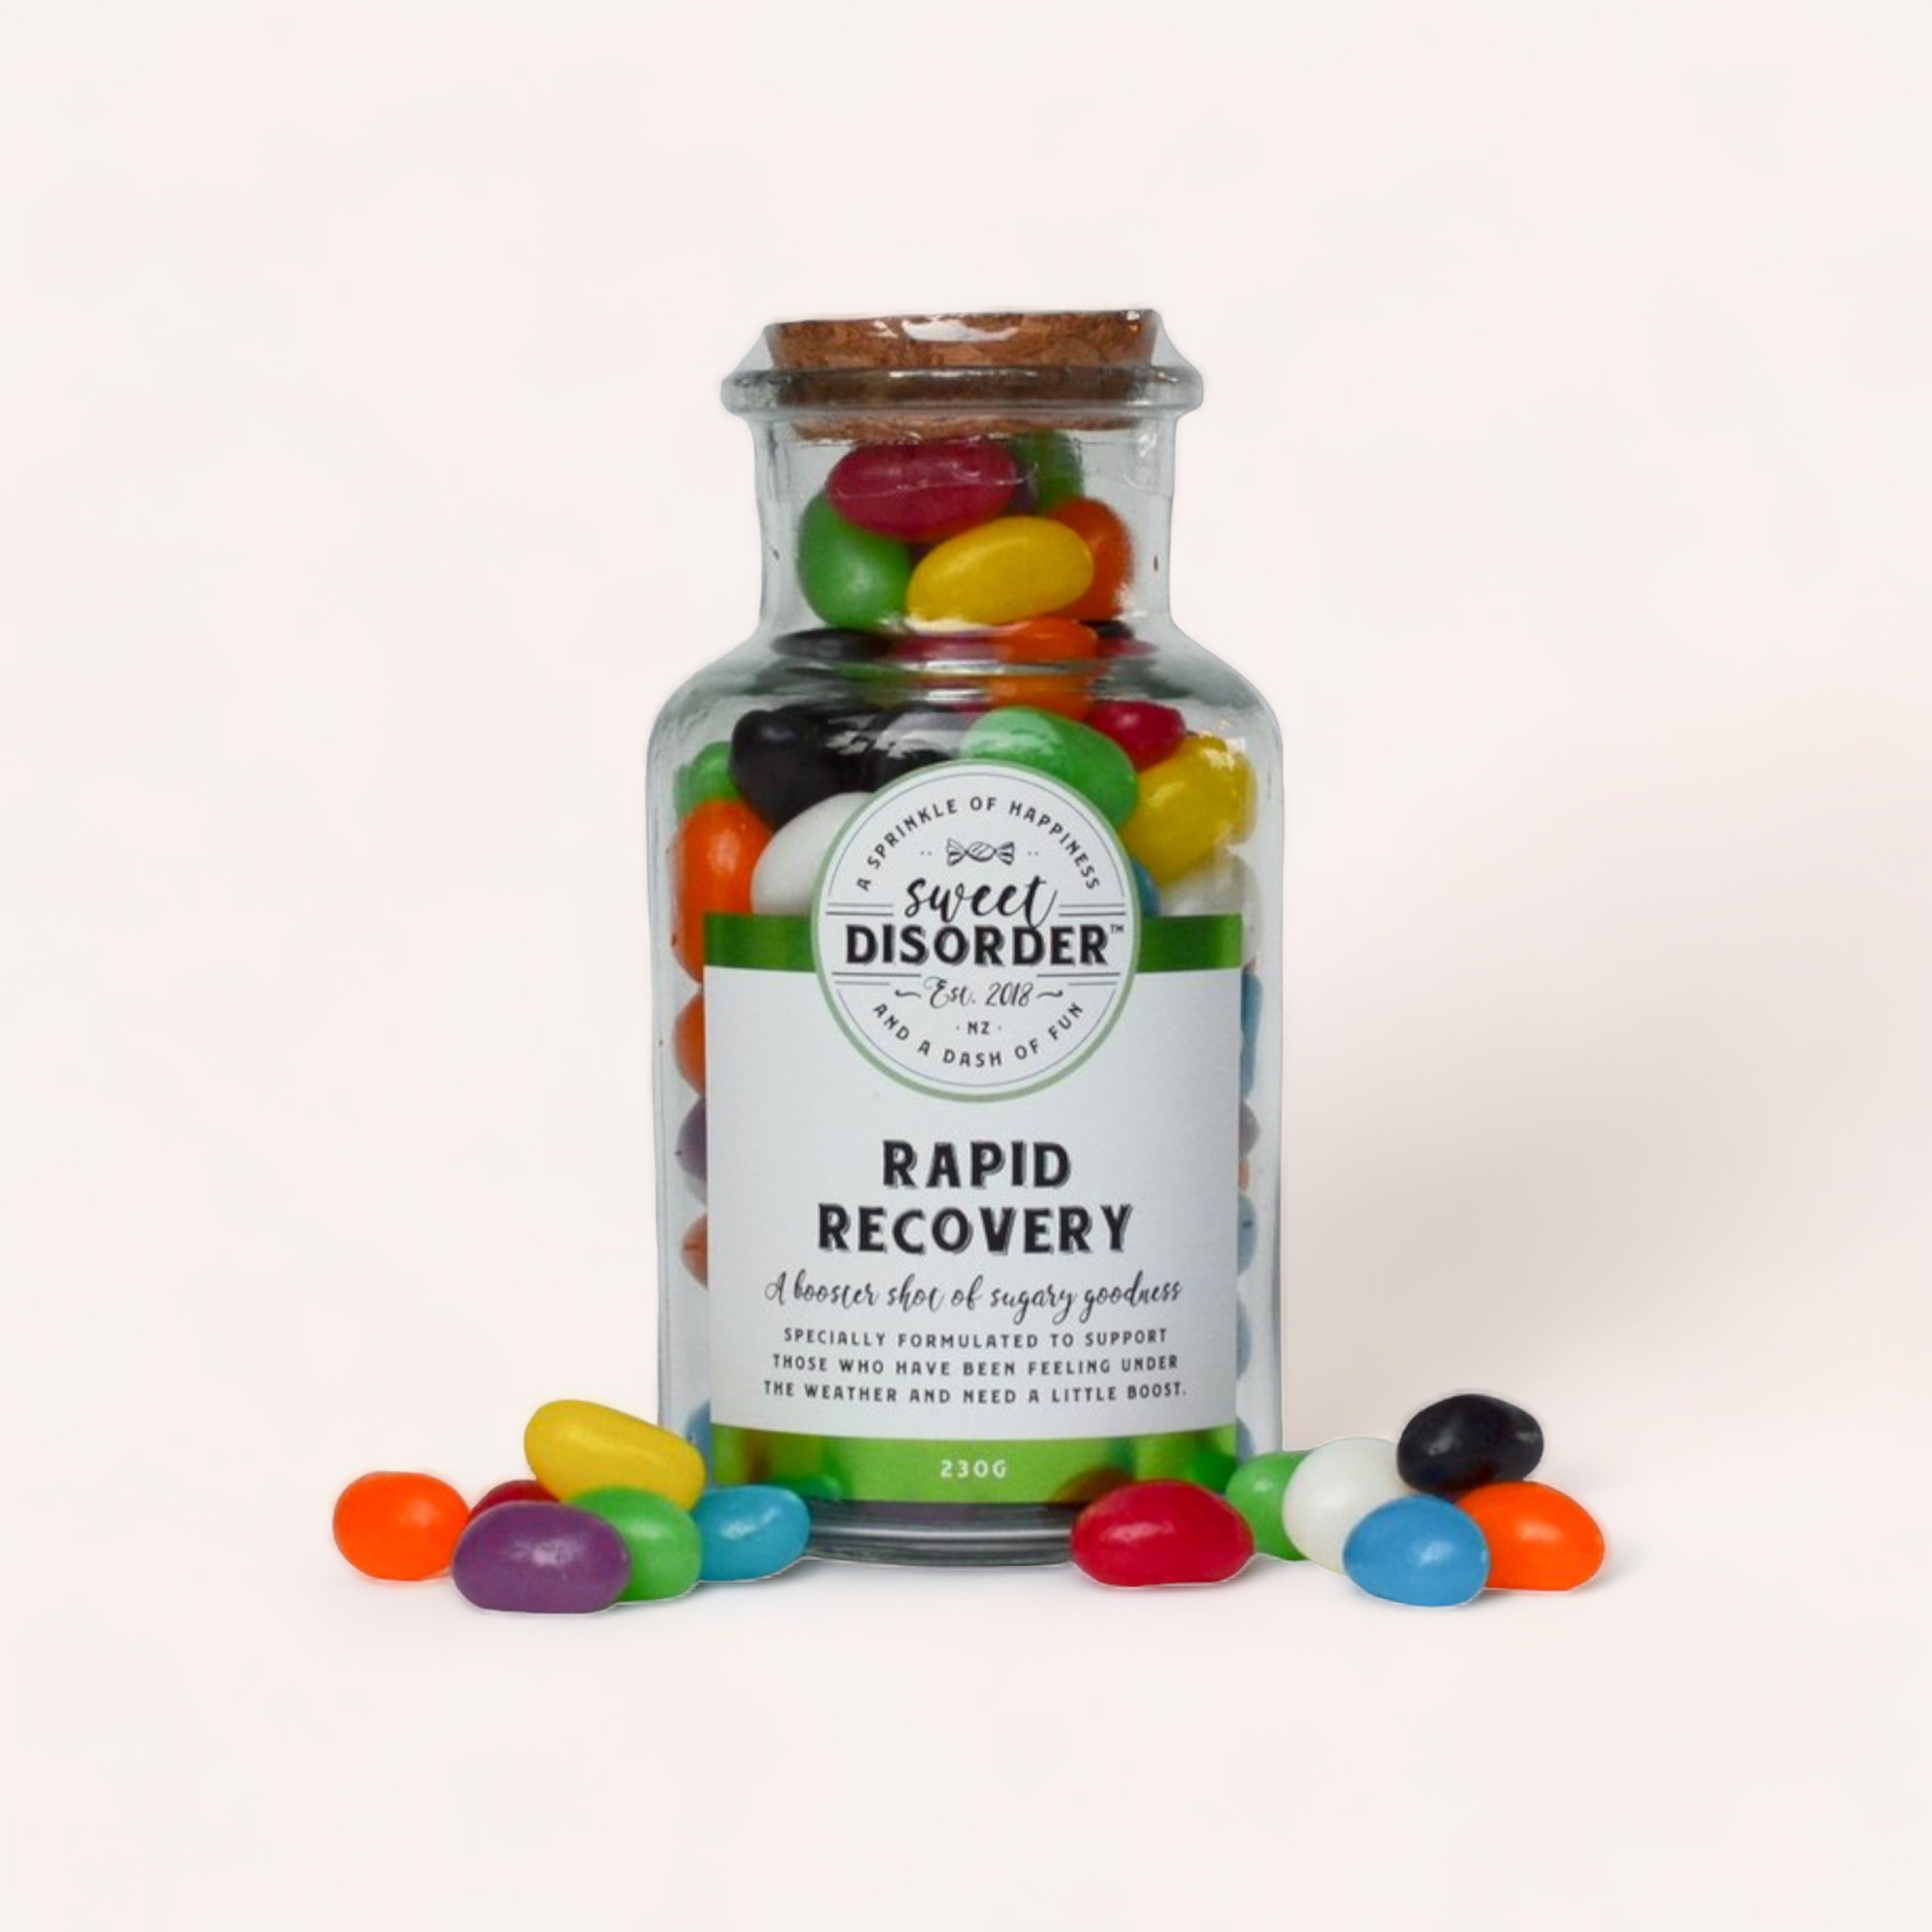 A colorful assortment of jelly beans spilling out of a Sweet Disorder "Rapid Recovery Lollies" prescription-styled candy jar, perfect for those feeling under the weather, against a white background.